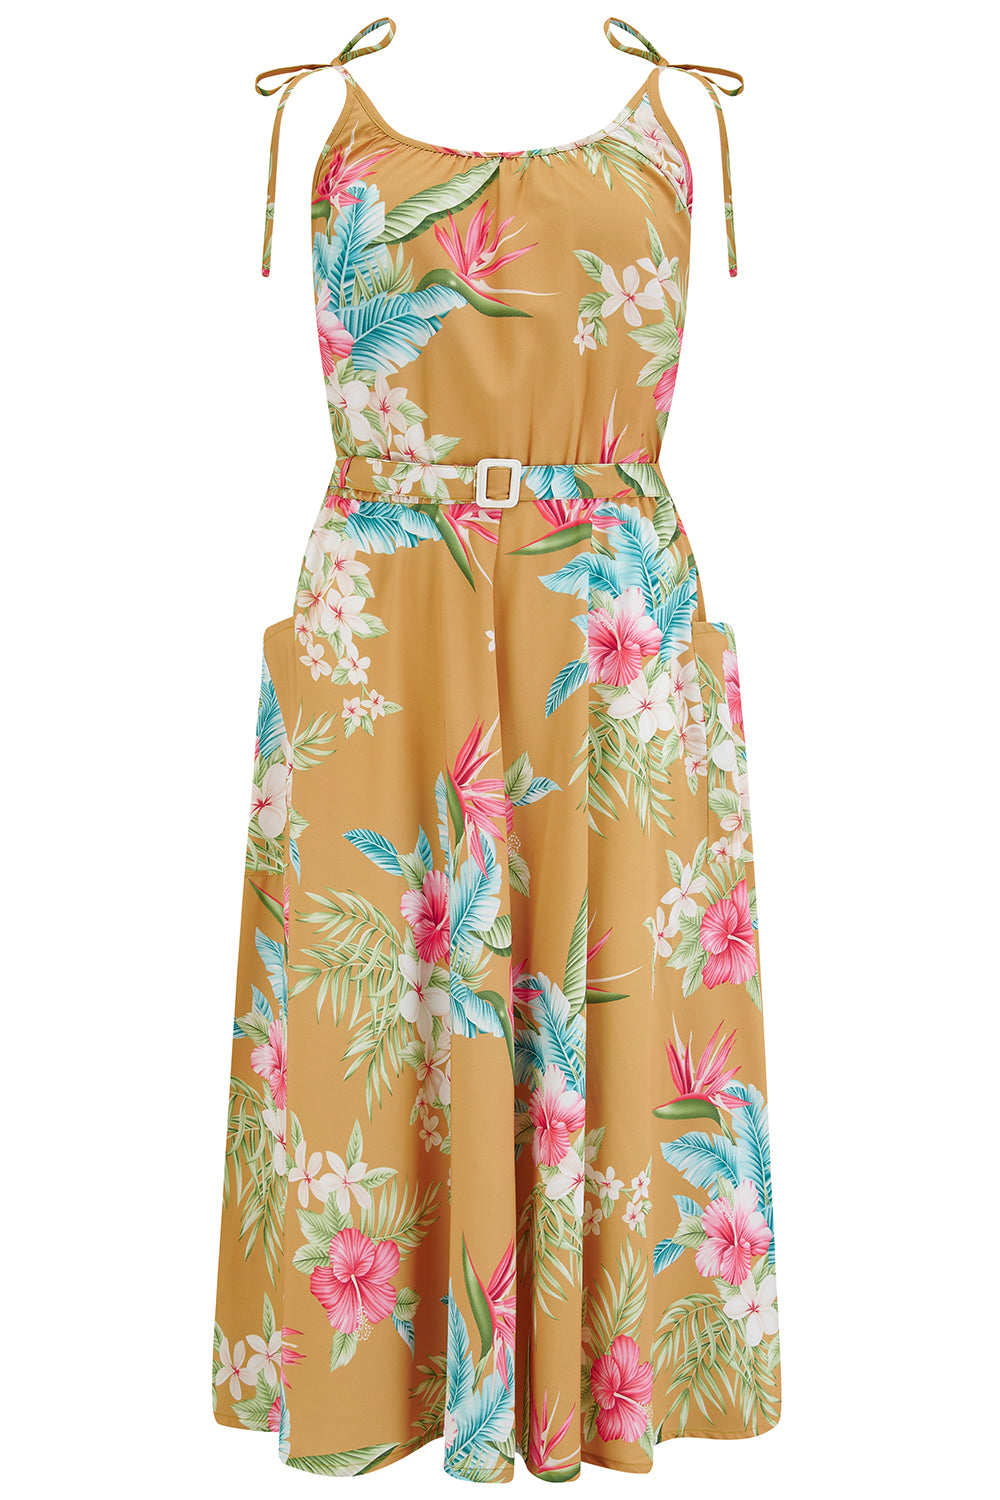 **Sample Sale** The "Suzy Sun Dress" in Mustard Honolulu, Easy To Wear Tiki Style From The 50s